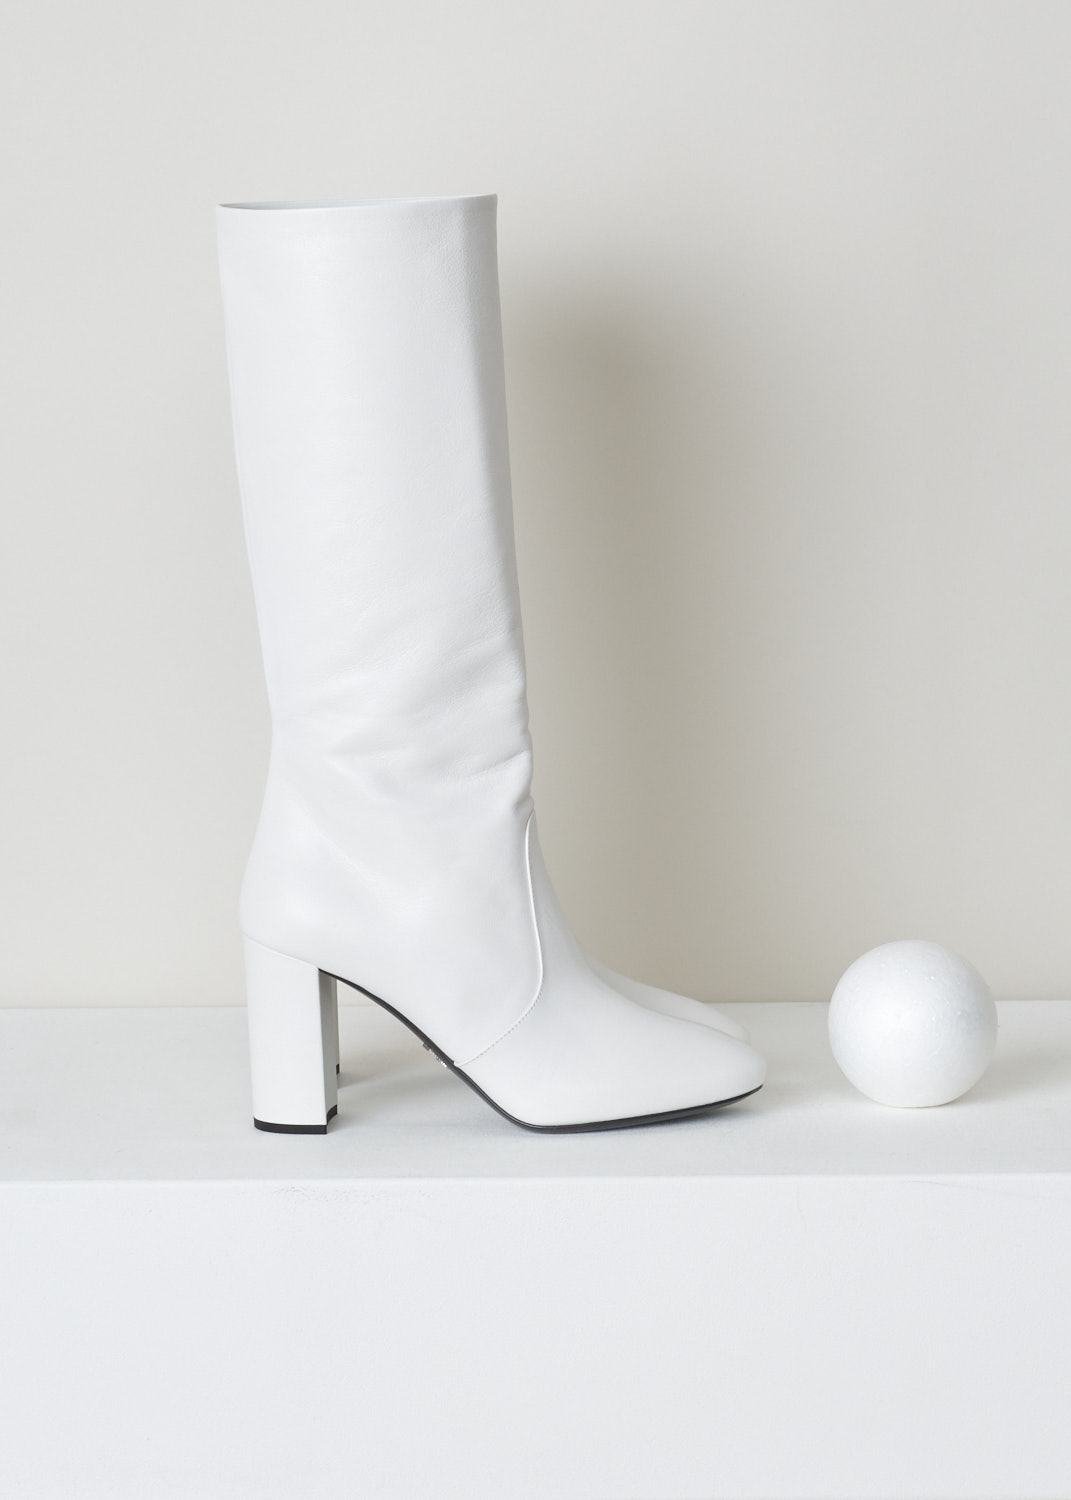 PRADA, WHITE HEELED BOOTS, MADRAS_1W684L_034_BIANCO, White, Side, White leather boots with a heel. These boots hit right below the knee. The toe of these shoes is almond shaped. The closure option on these boots is the zipper on the inside of the leg.

Heel height: 8.5 cm / 3.3 inch  
